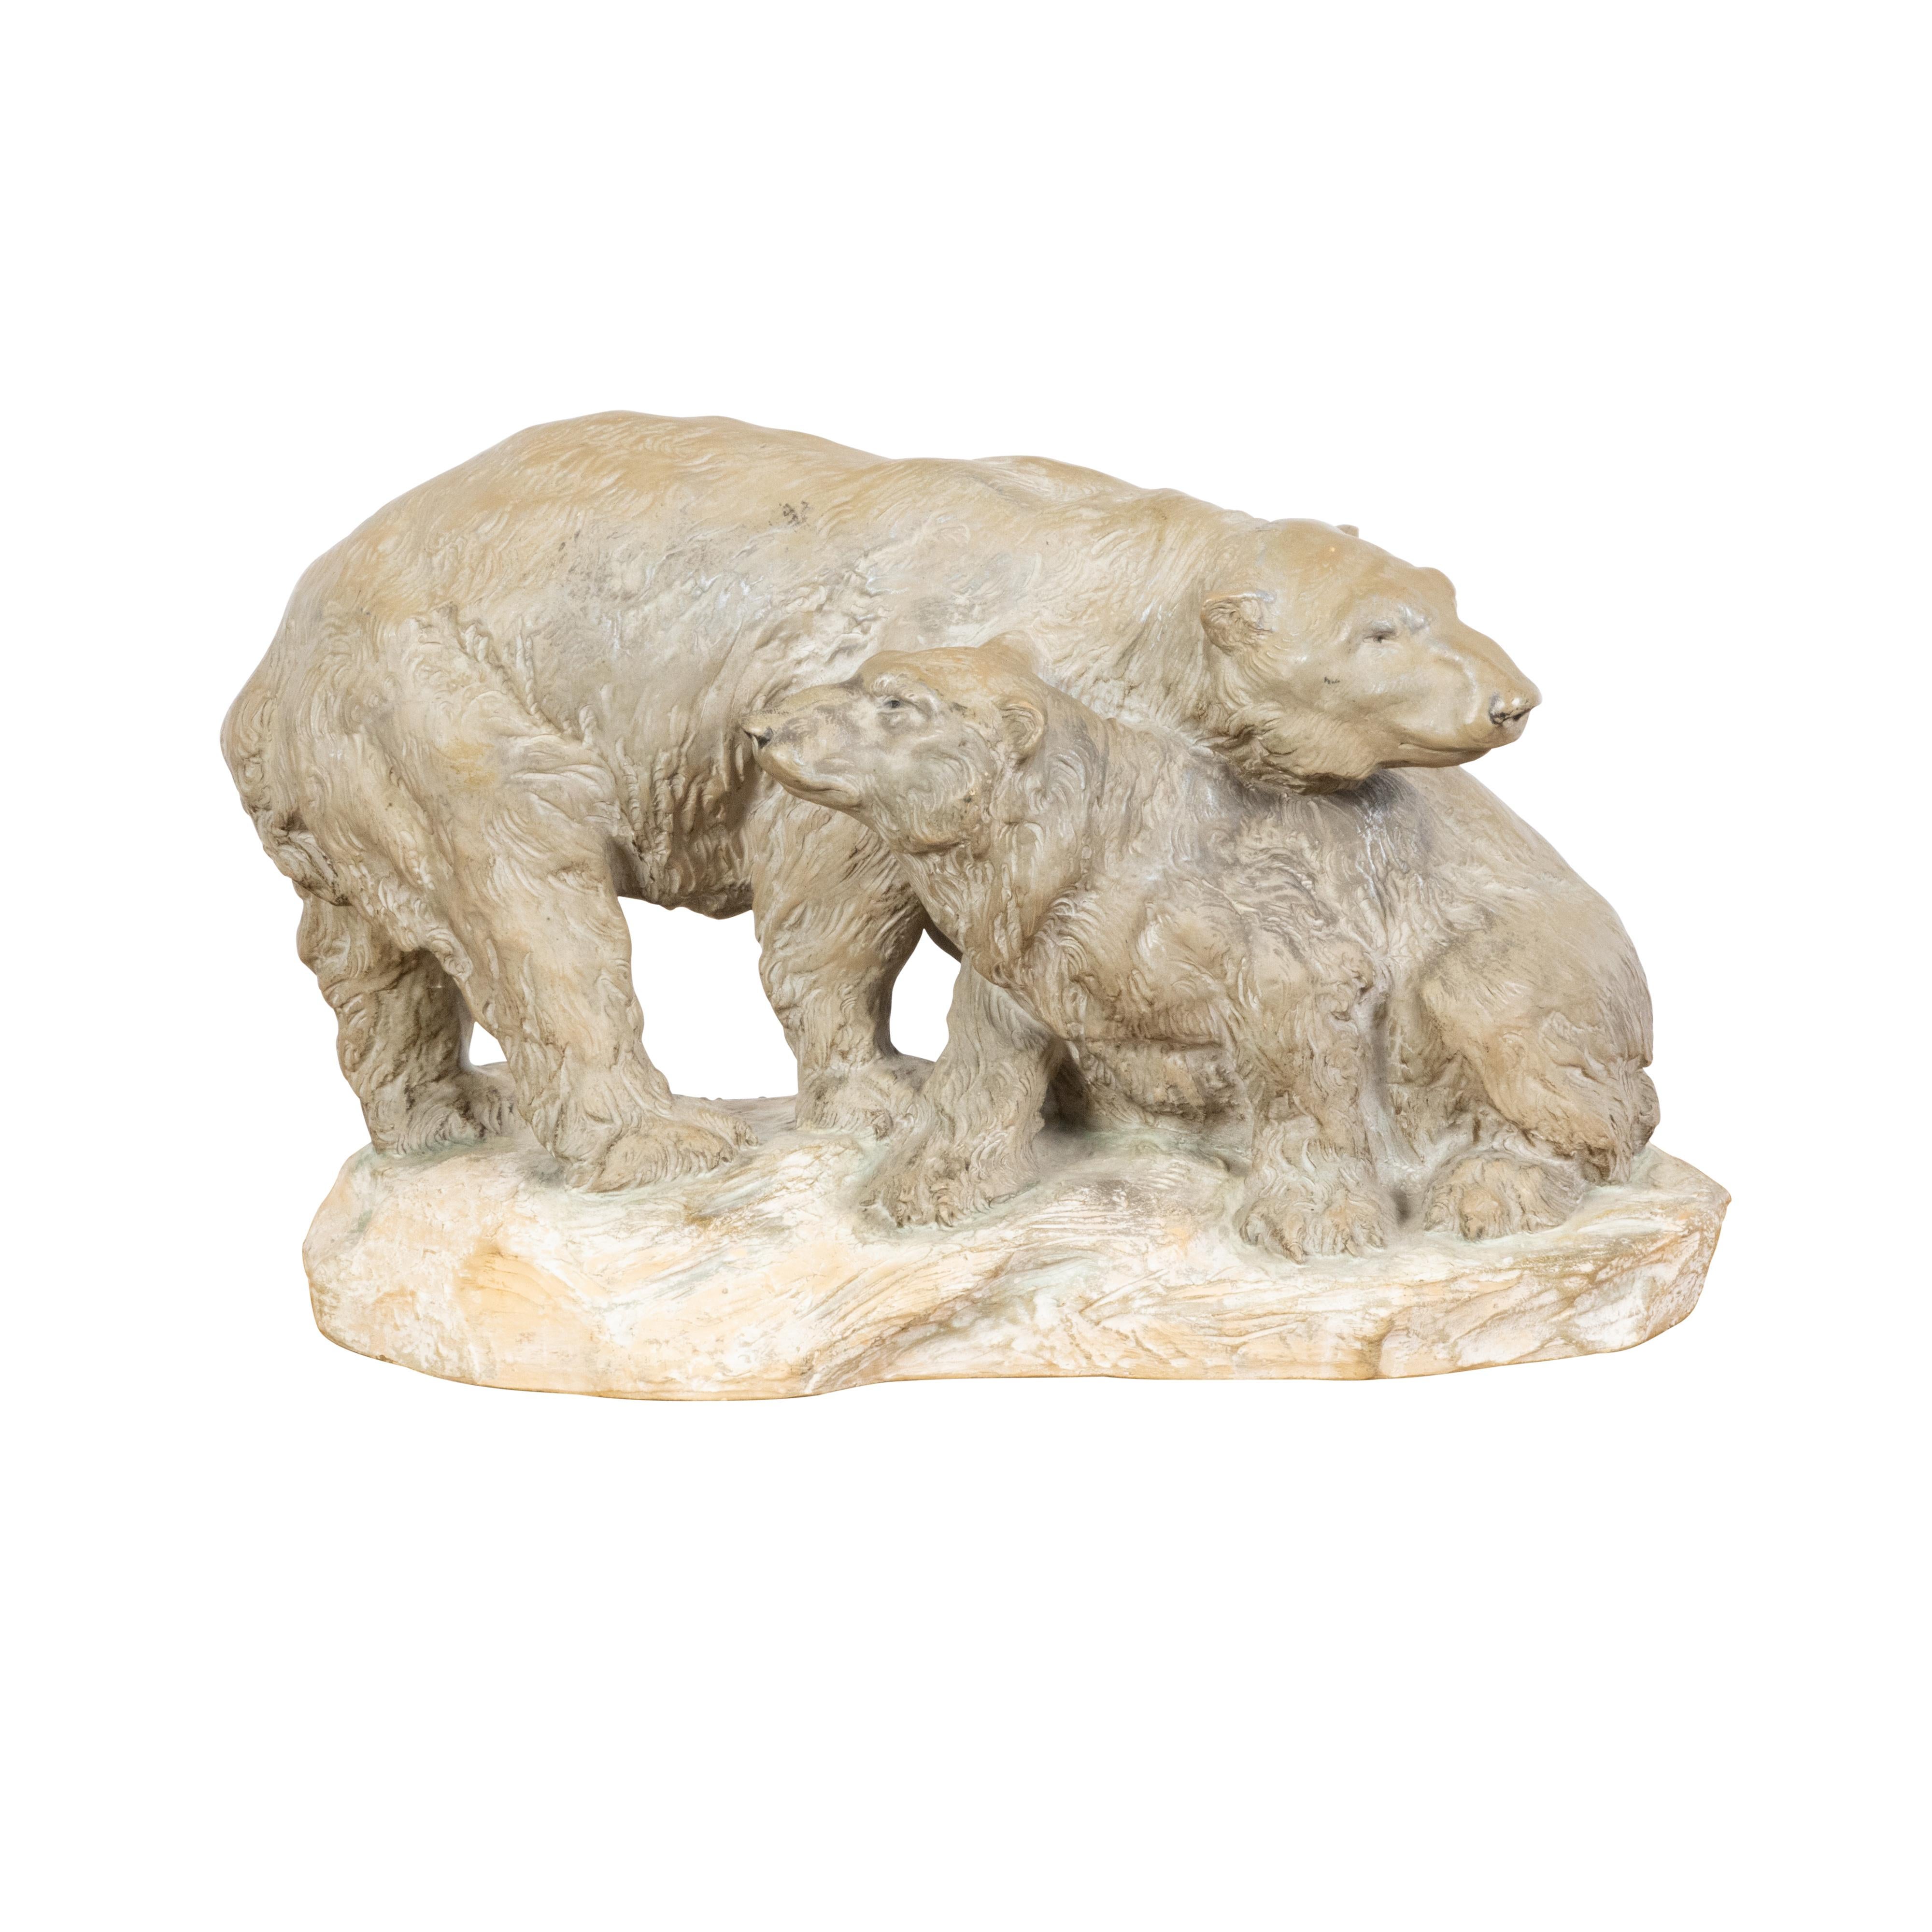 Continental Midcentury Terracotta Sculpture Depicting Two Bears on a Base For Sale